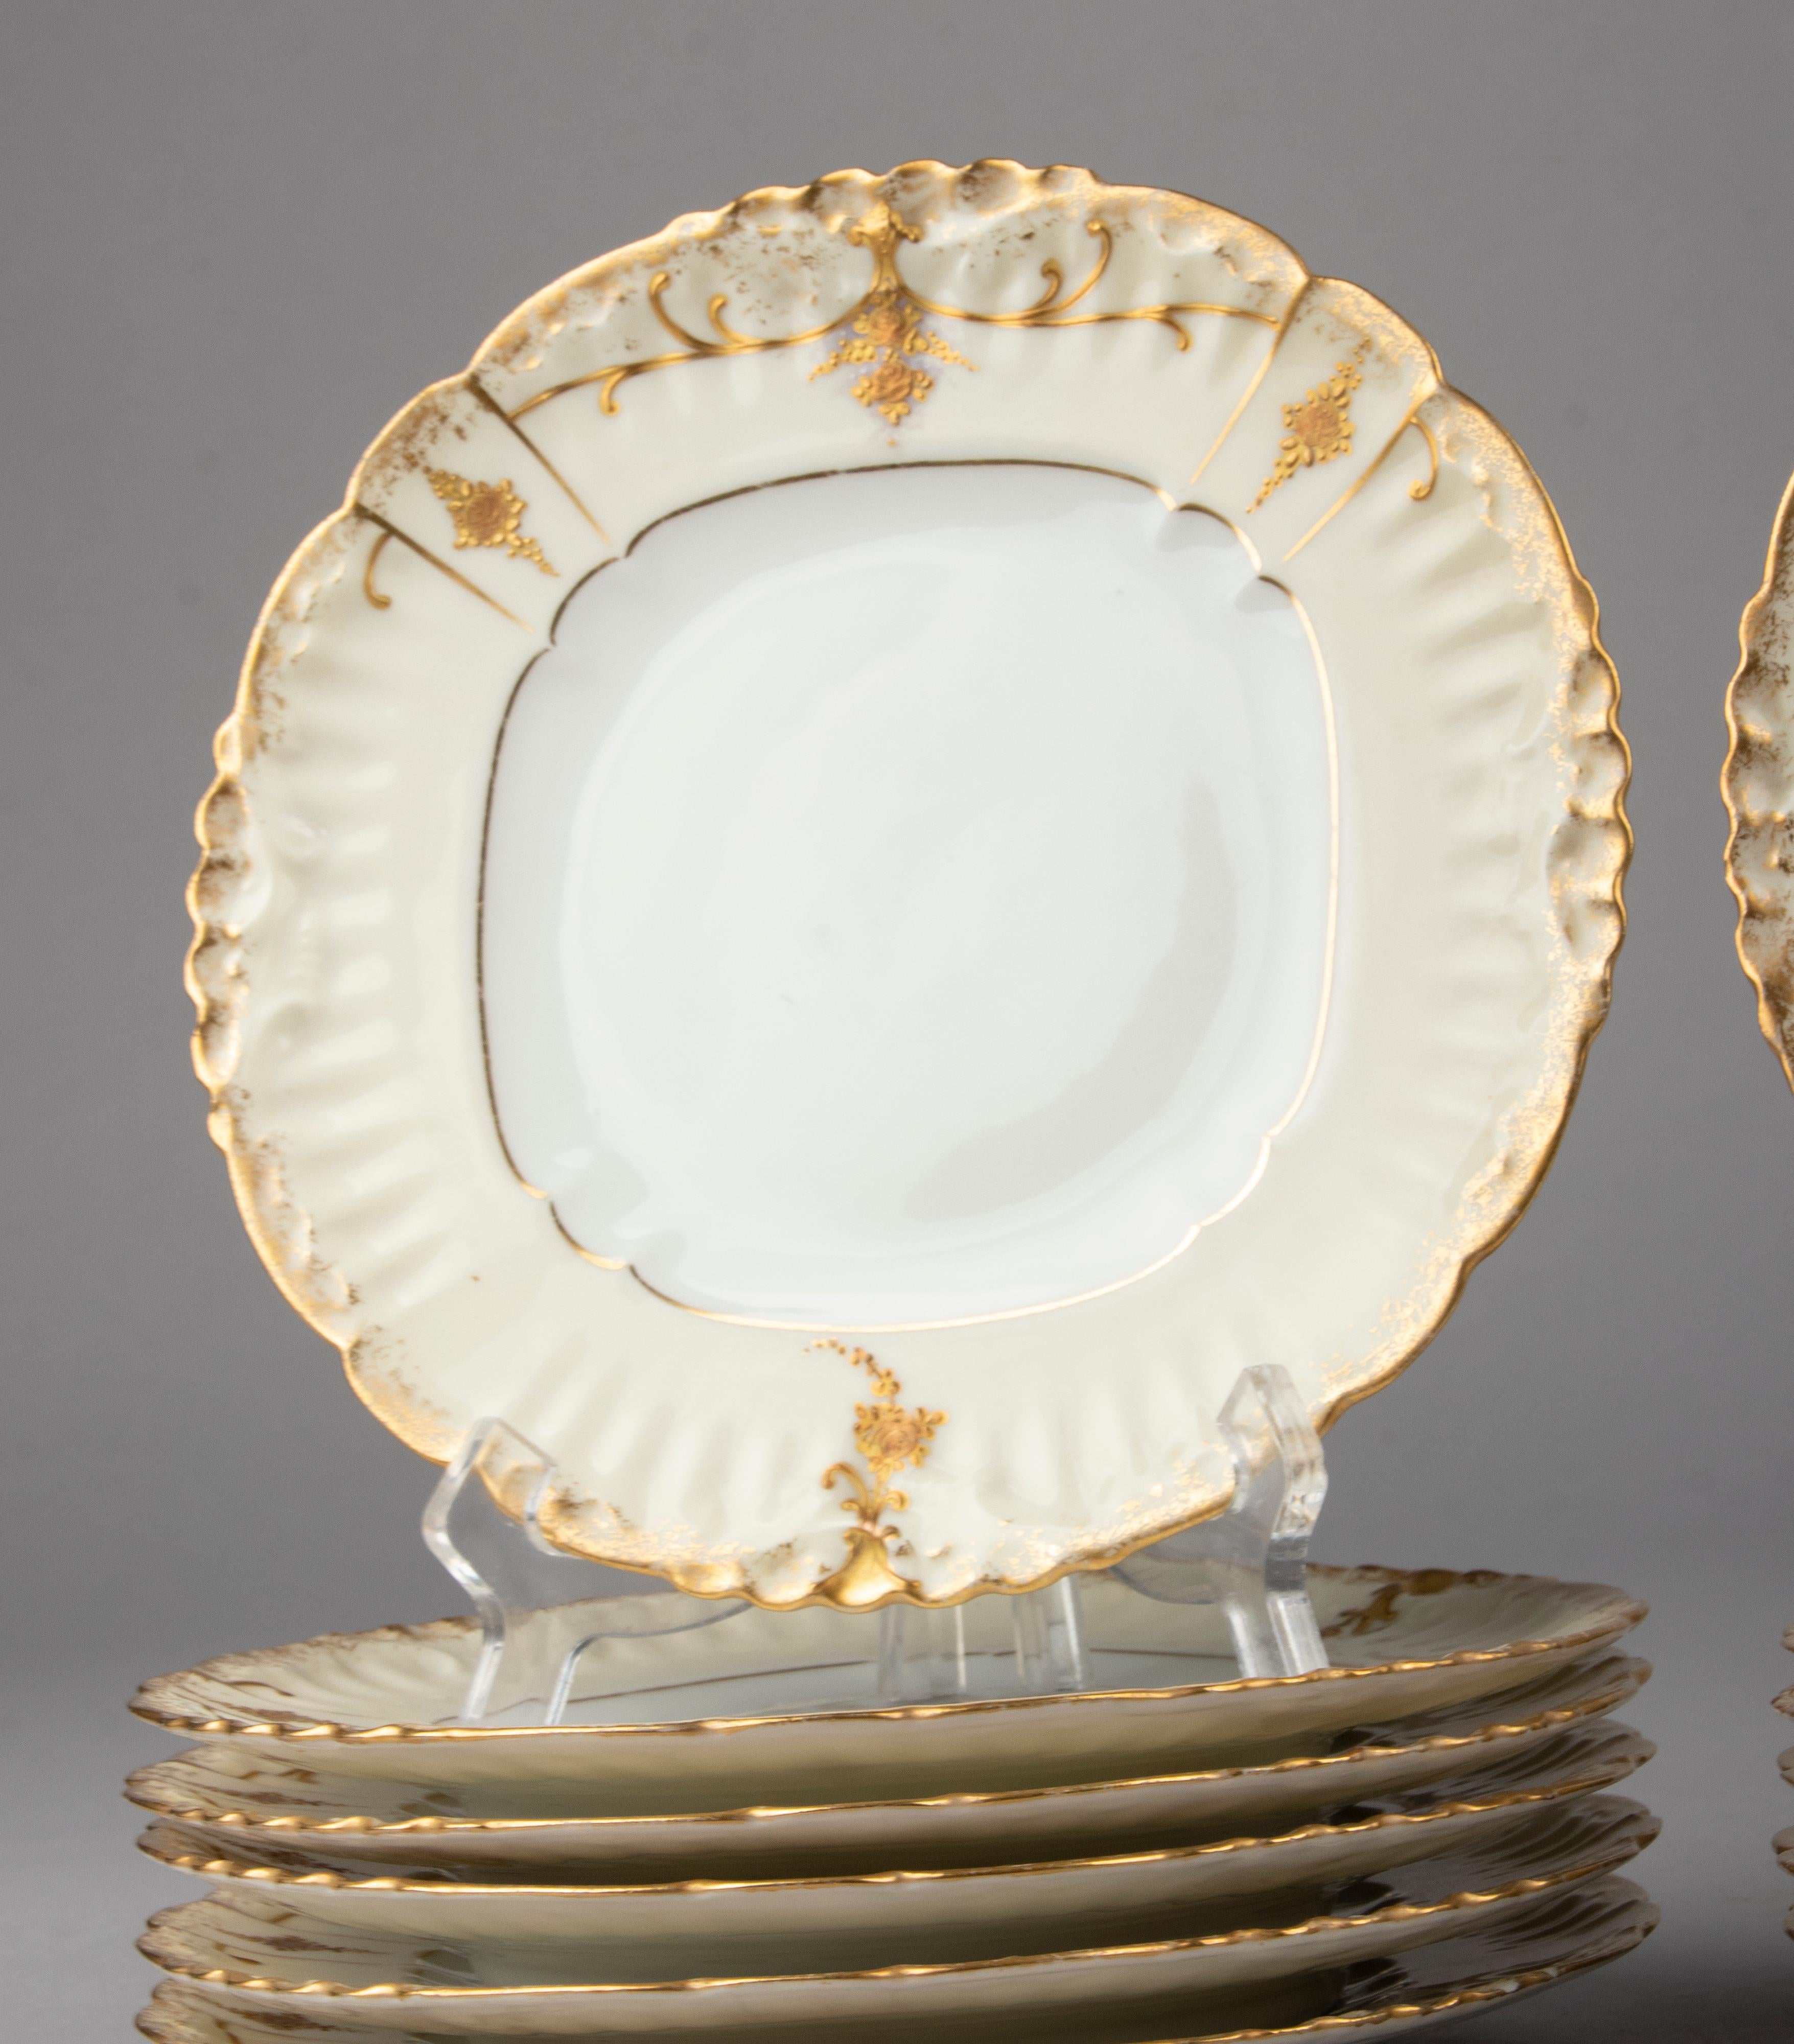 Set of 11 Early 20th Century Porcelain Dessert Plates Gilded by Limoges 1